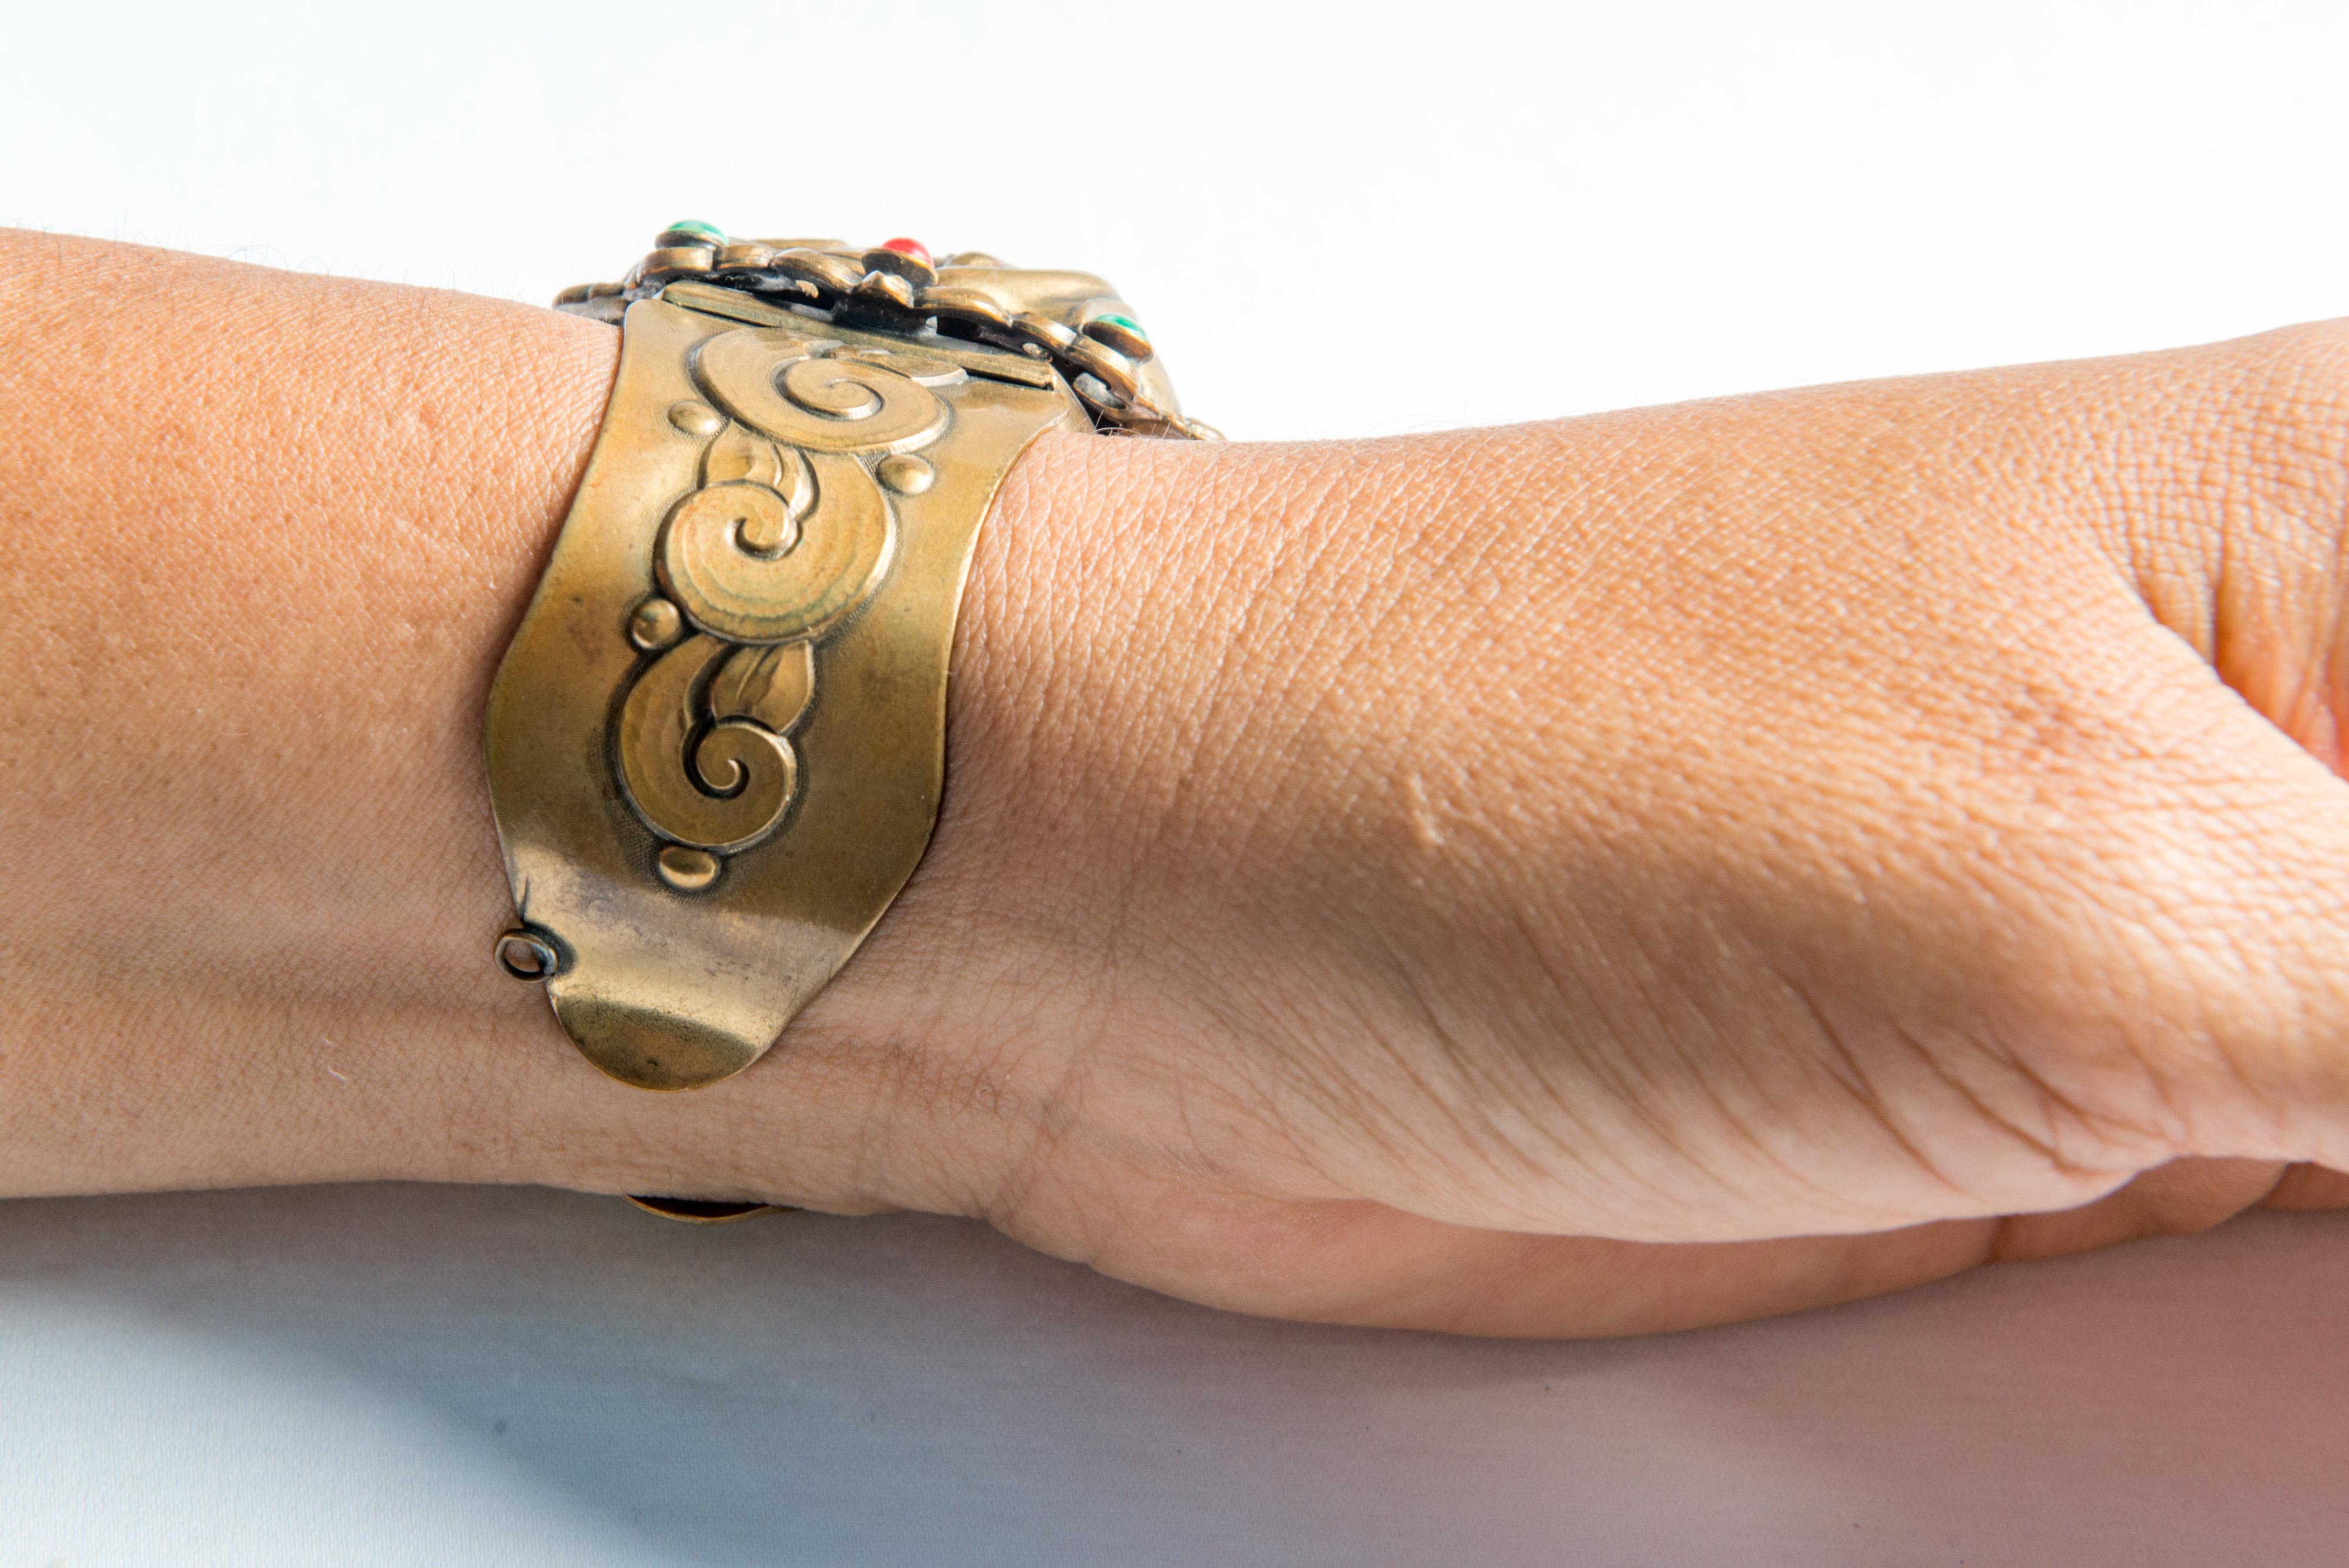 Hobe Warrior Cuff Bracelet In Good Condition For Sale In Stamford, CT